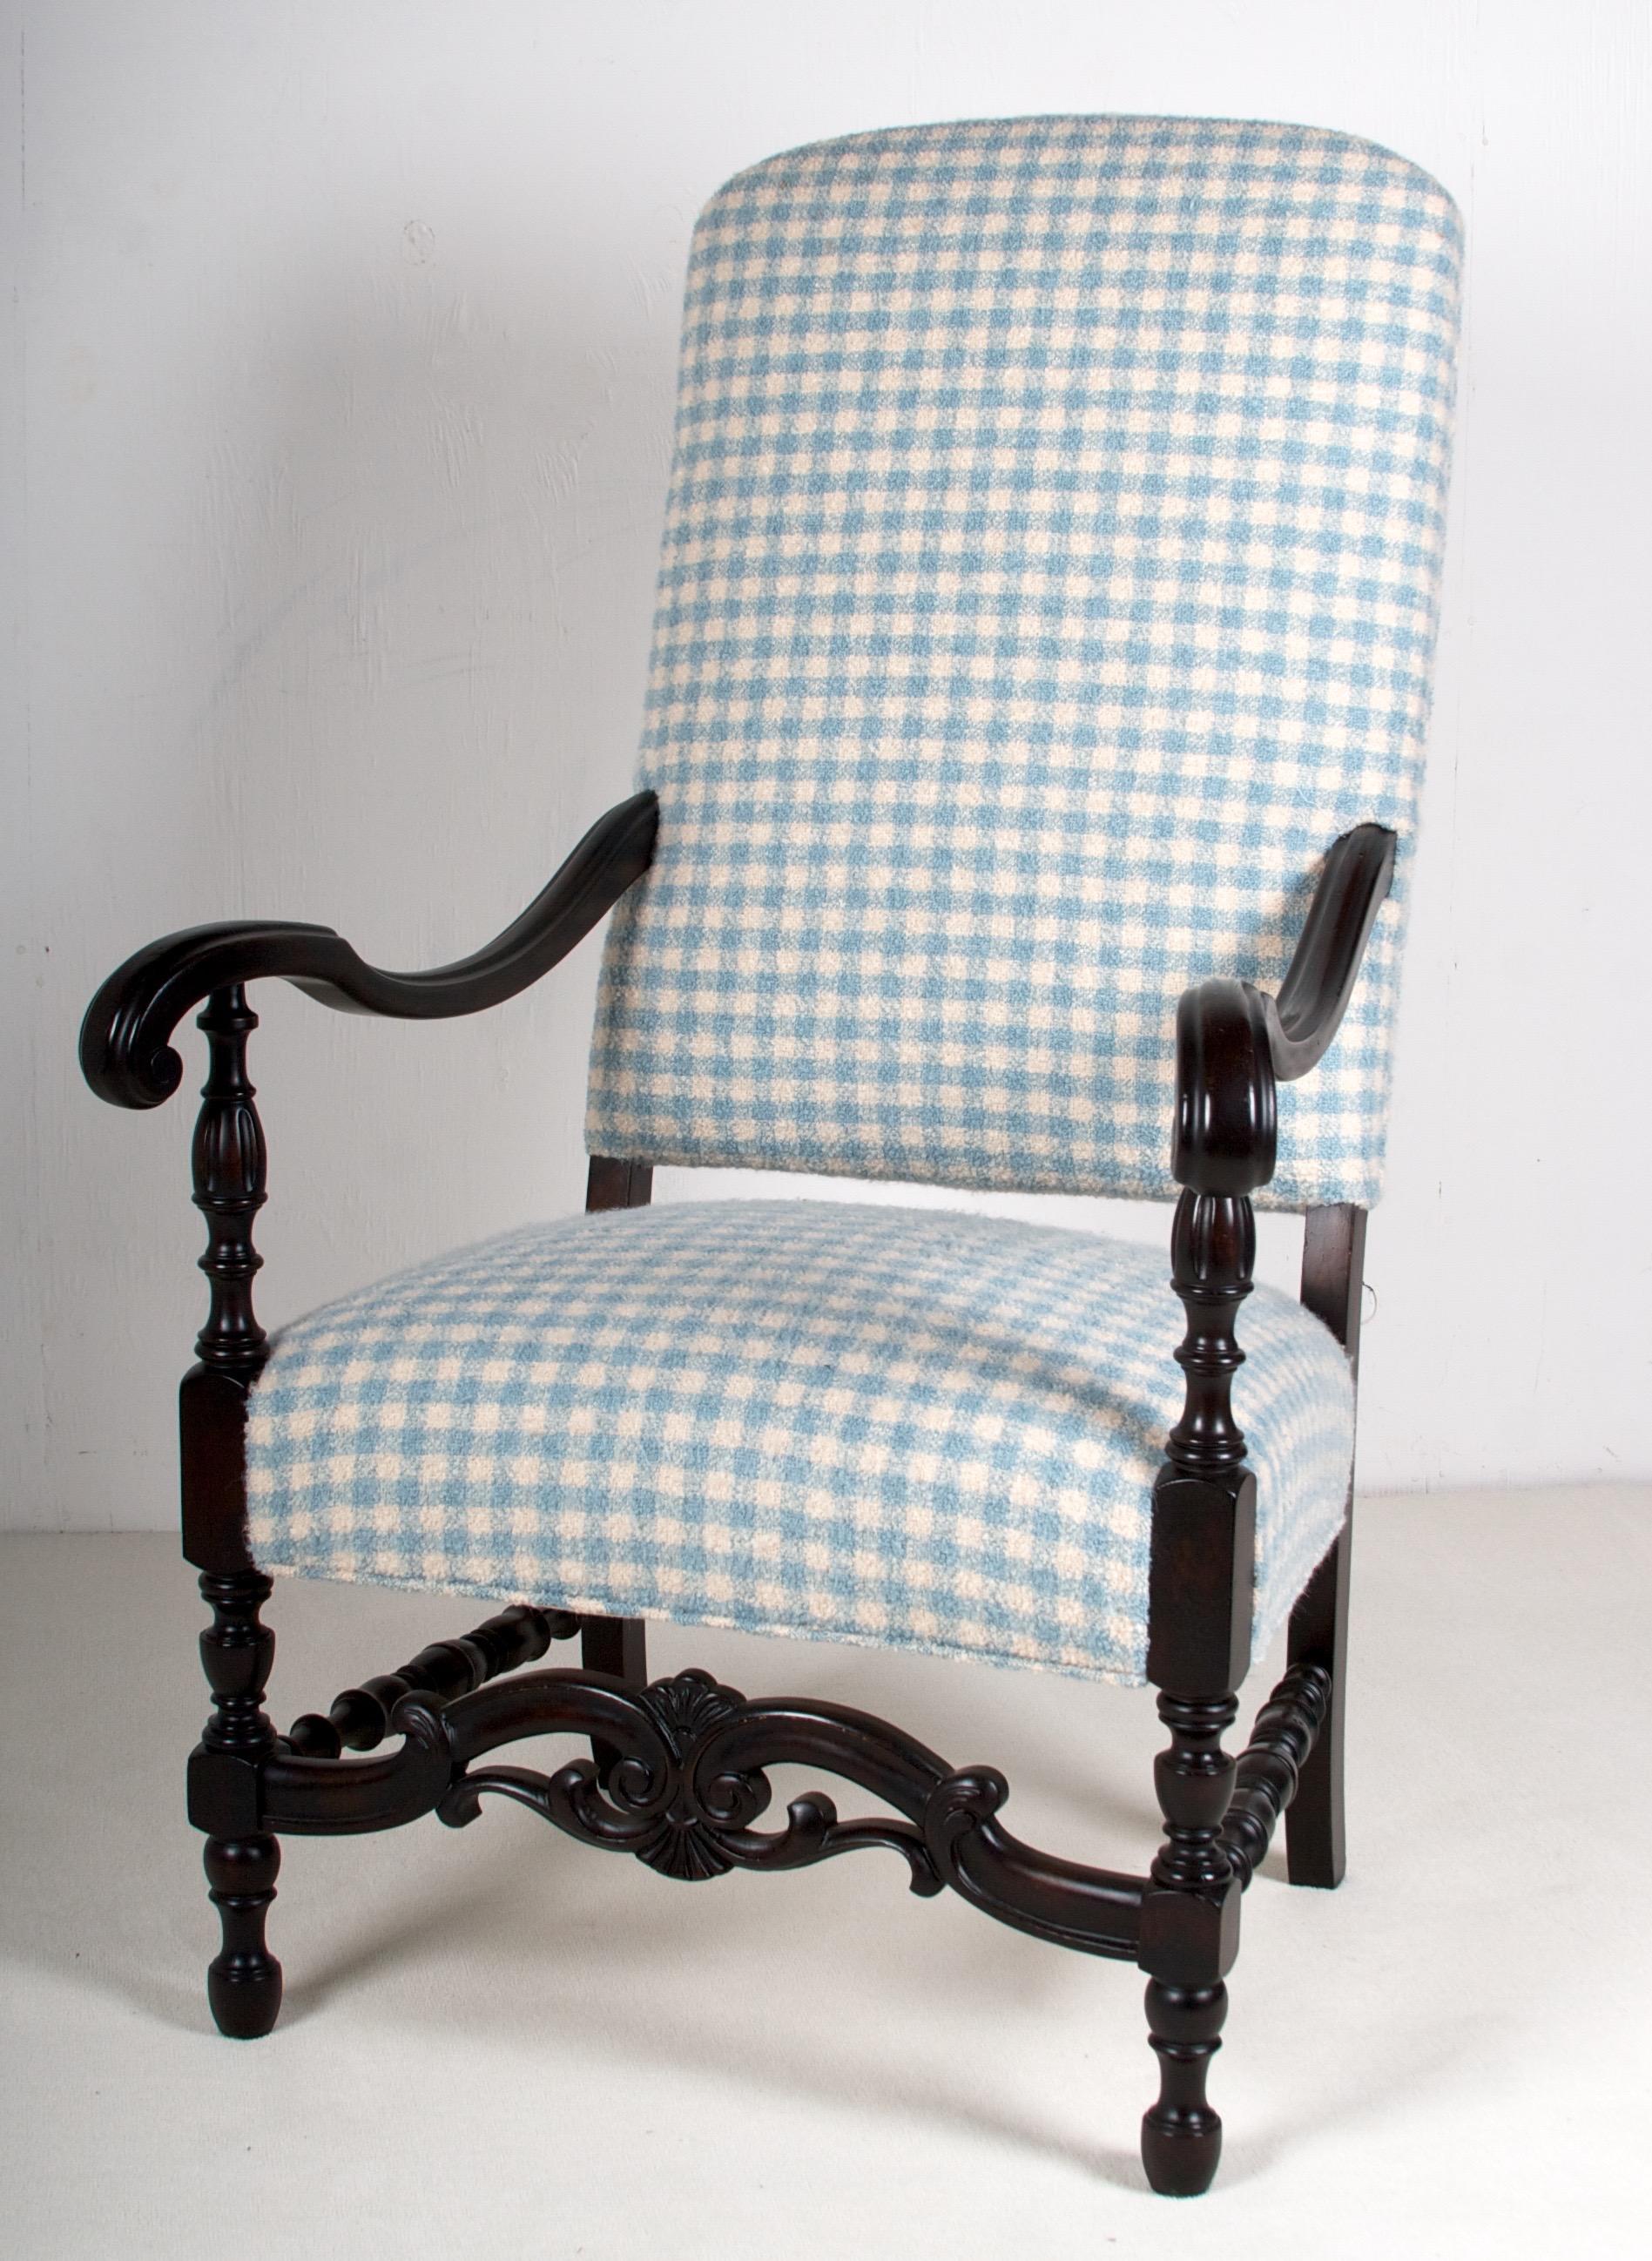 The entire chair was gently restored, the upholstery fabric is the finest Alpaca bouclé, in a soft cream and blue check. The Alpaca is from the Sandra Jorday
Pima Alpaca collection. The fabric is the finest and softest Alpaca, and is also
quite